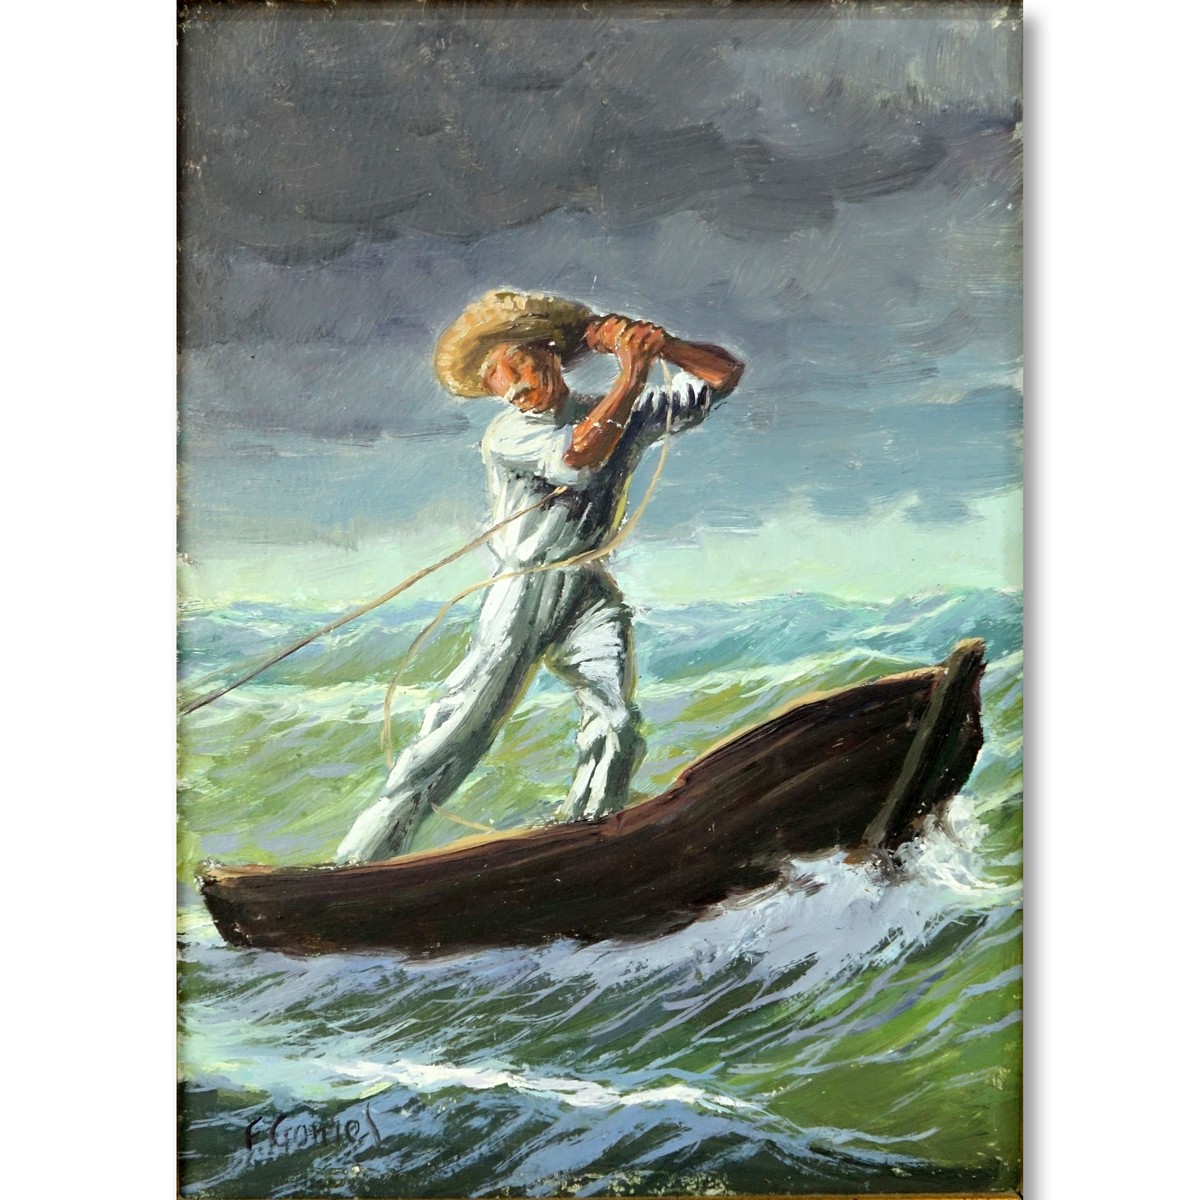 Fernando Pinto Gomes, (20th C) Oil on Masonite, Fisherman at Sea, Signed Lower Left. Label attached en verso.